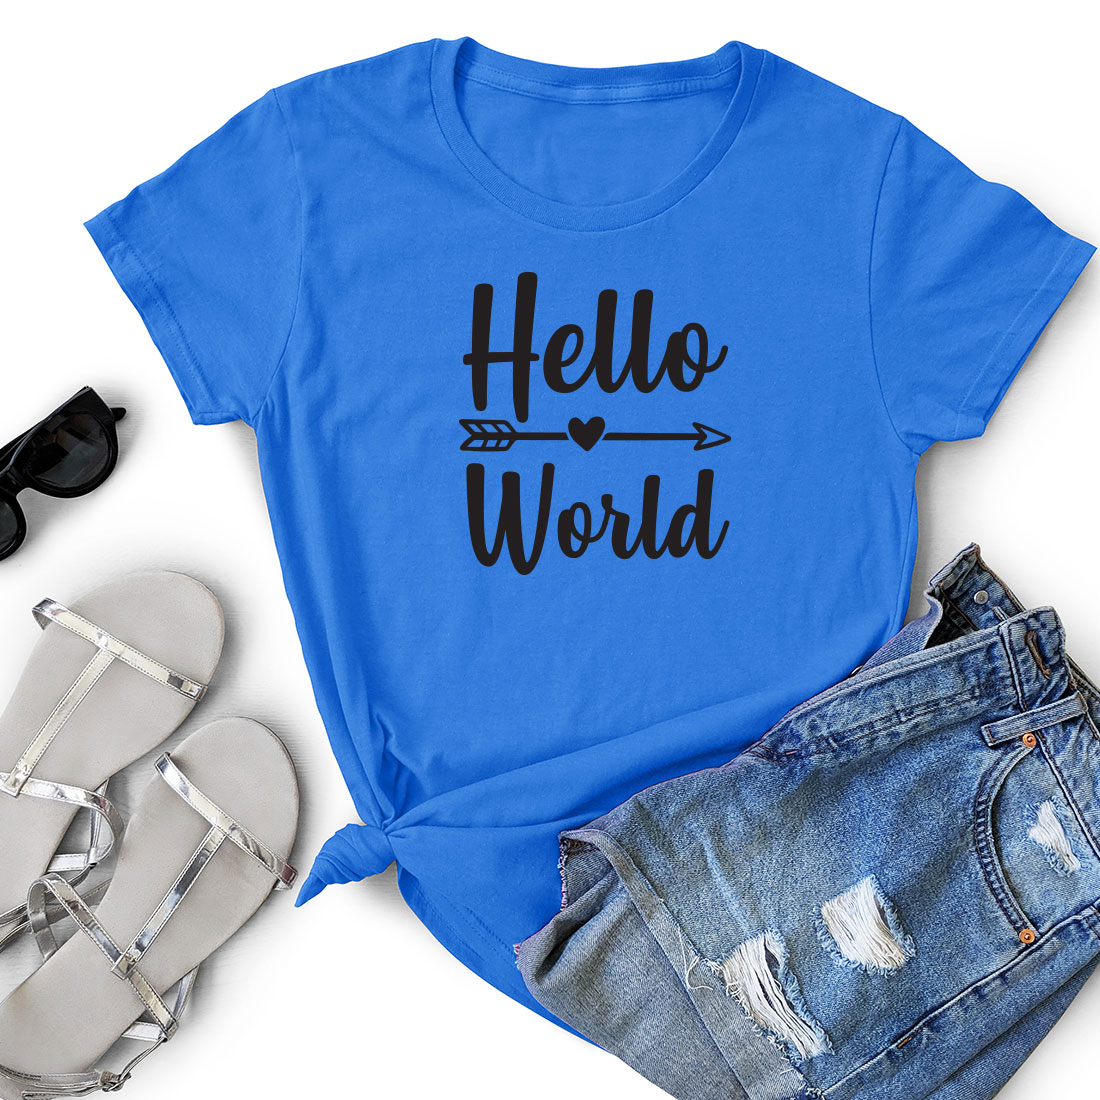 T - shirt that says hello world next to a pair of shorts.